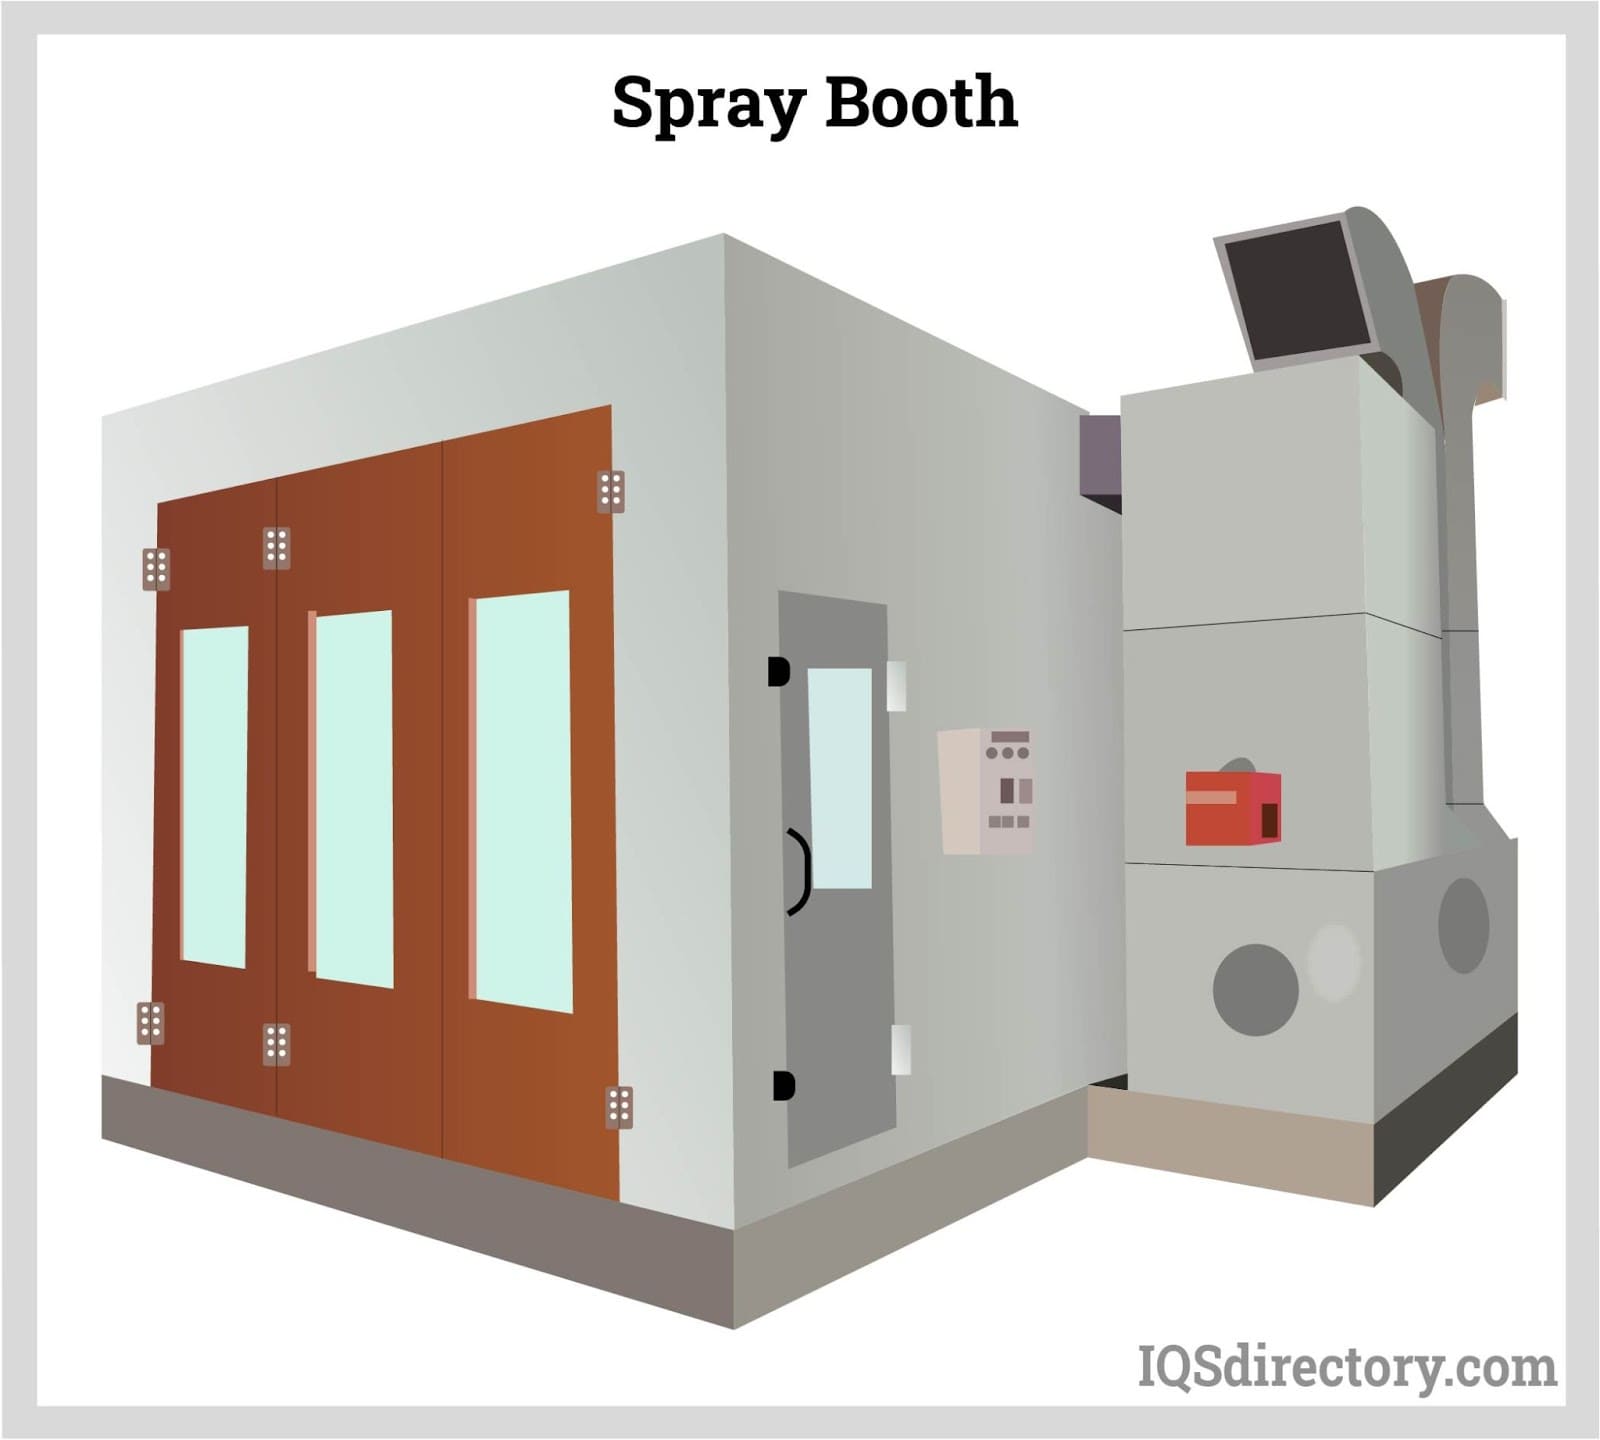 Testing 's Biggest Spray Booth For Airbrushing 